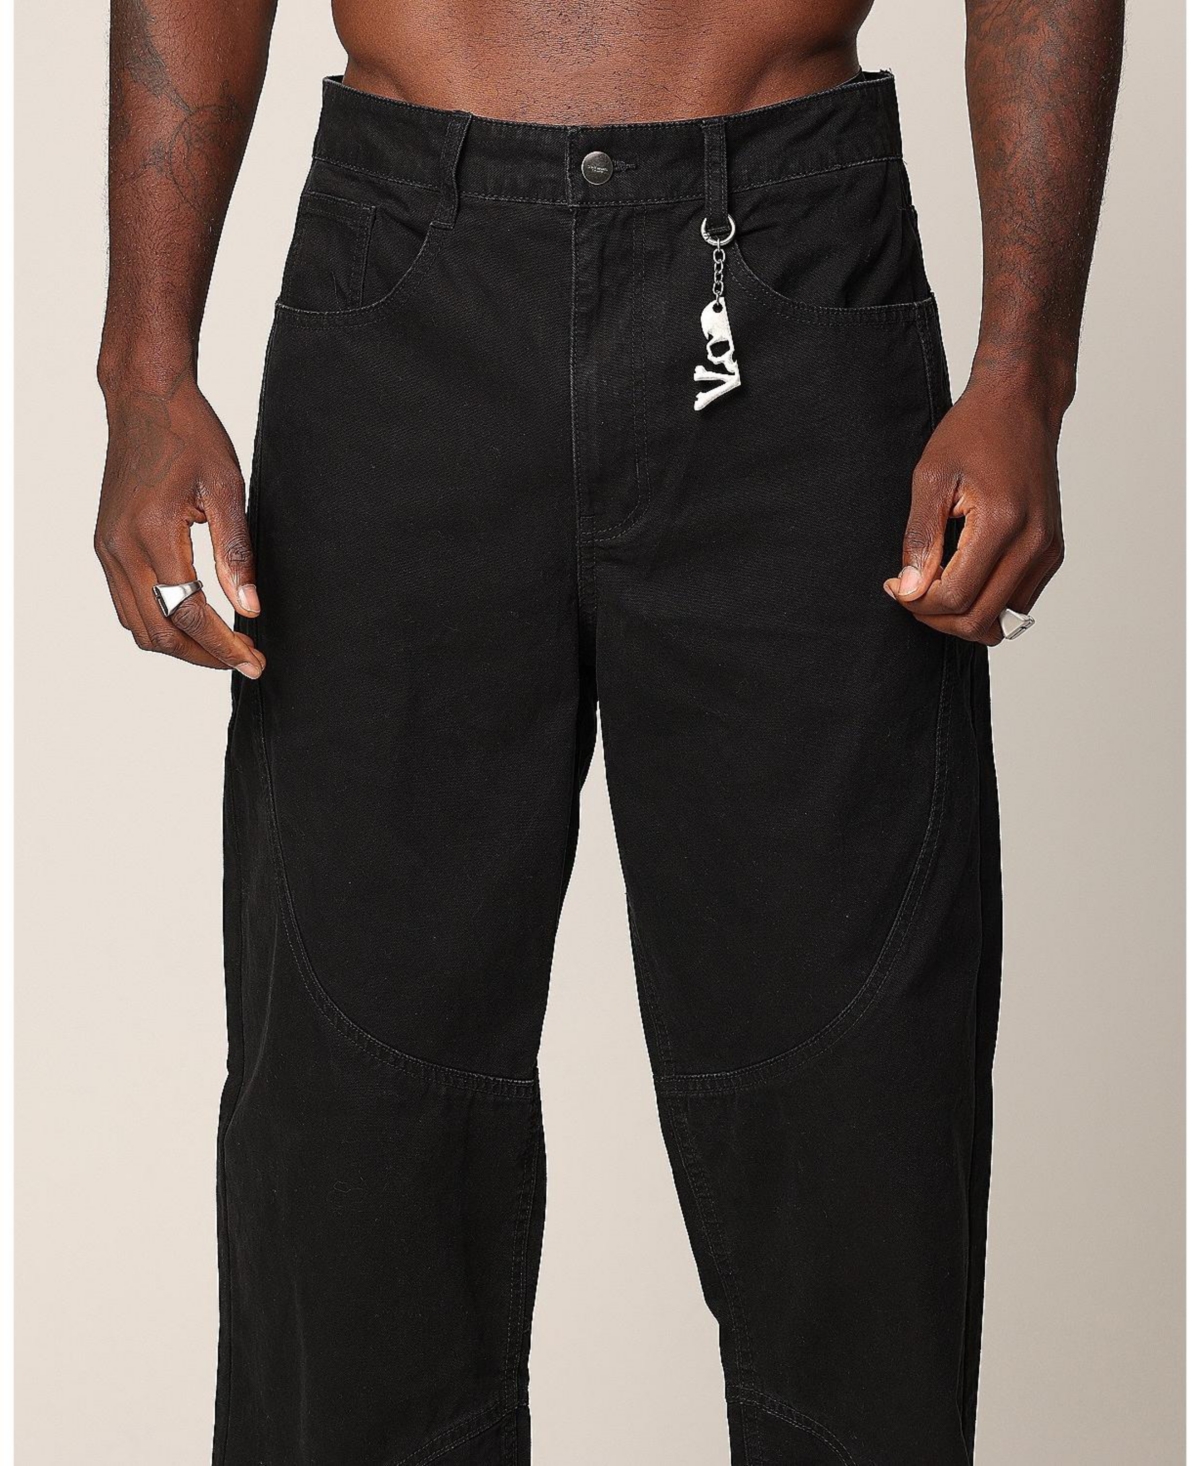 Men's Outlaw Rodeo Jeans - Aged black